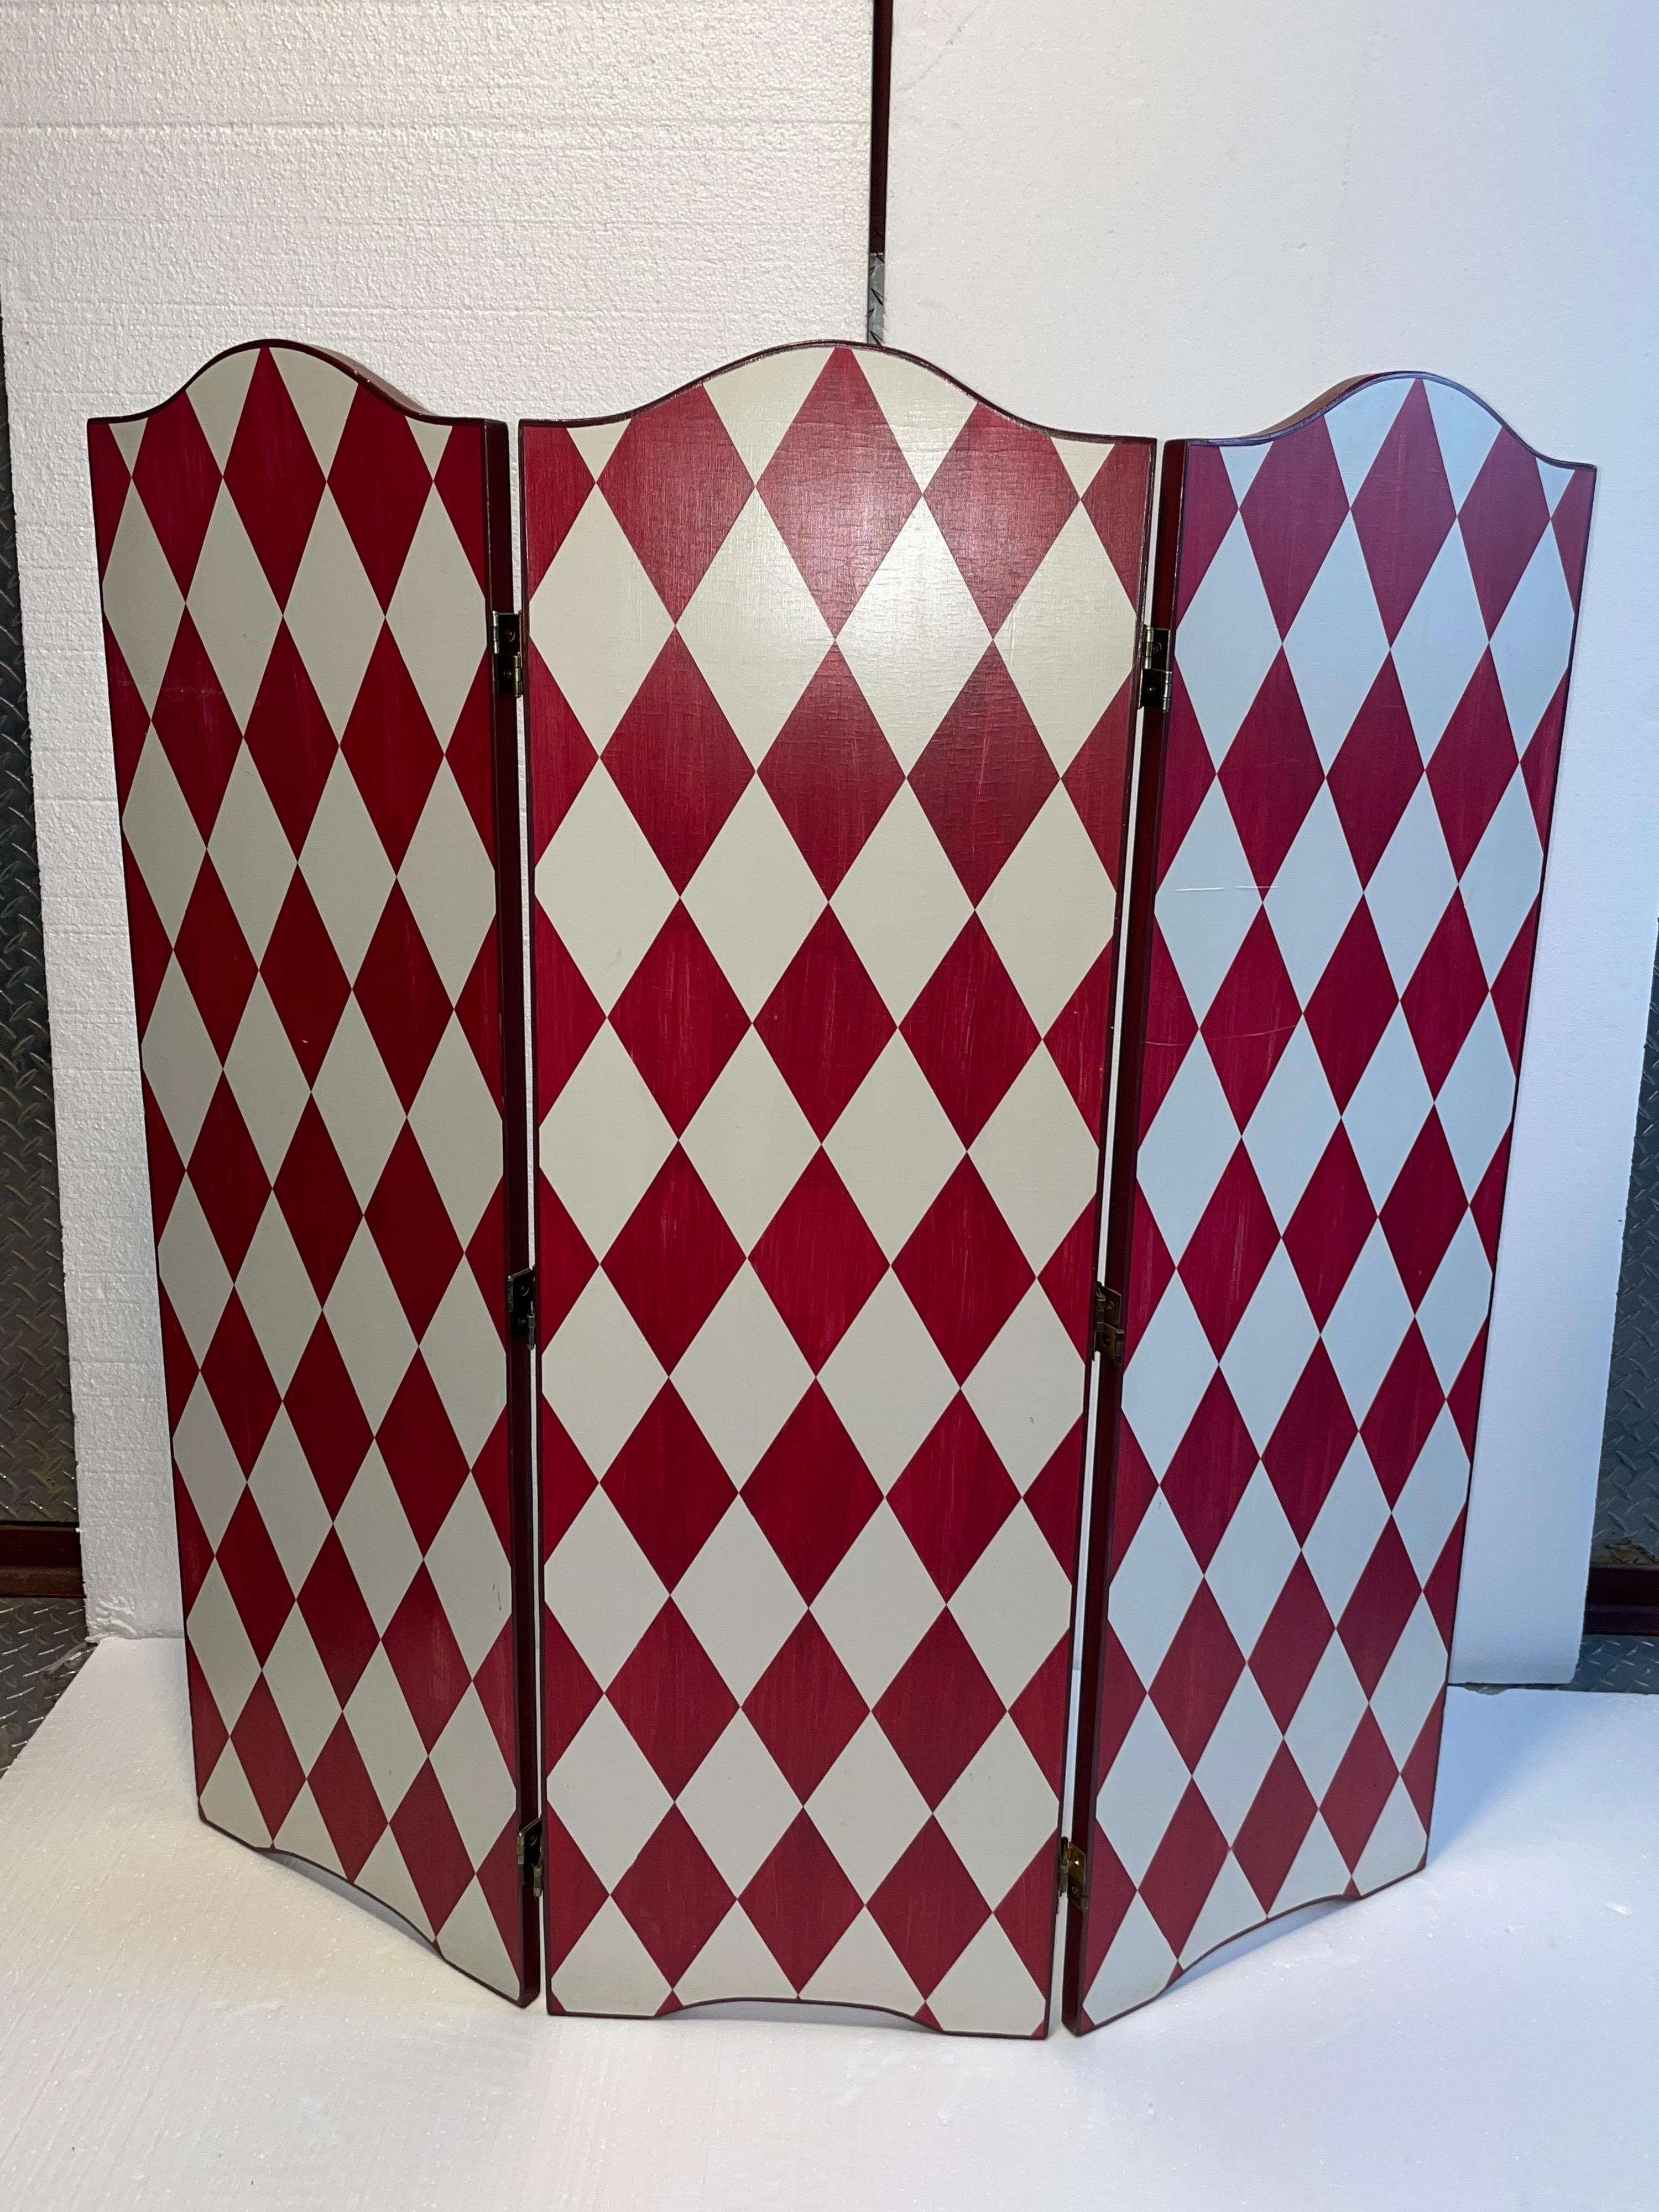 Belle Époque Artistic Hand Painted French Screen Divider in a Festive White and Deep Red For Sale